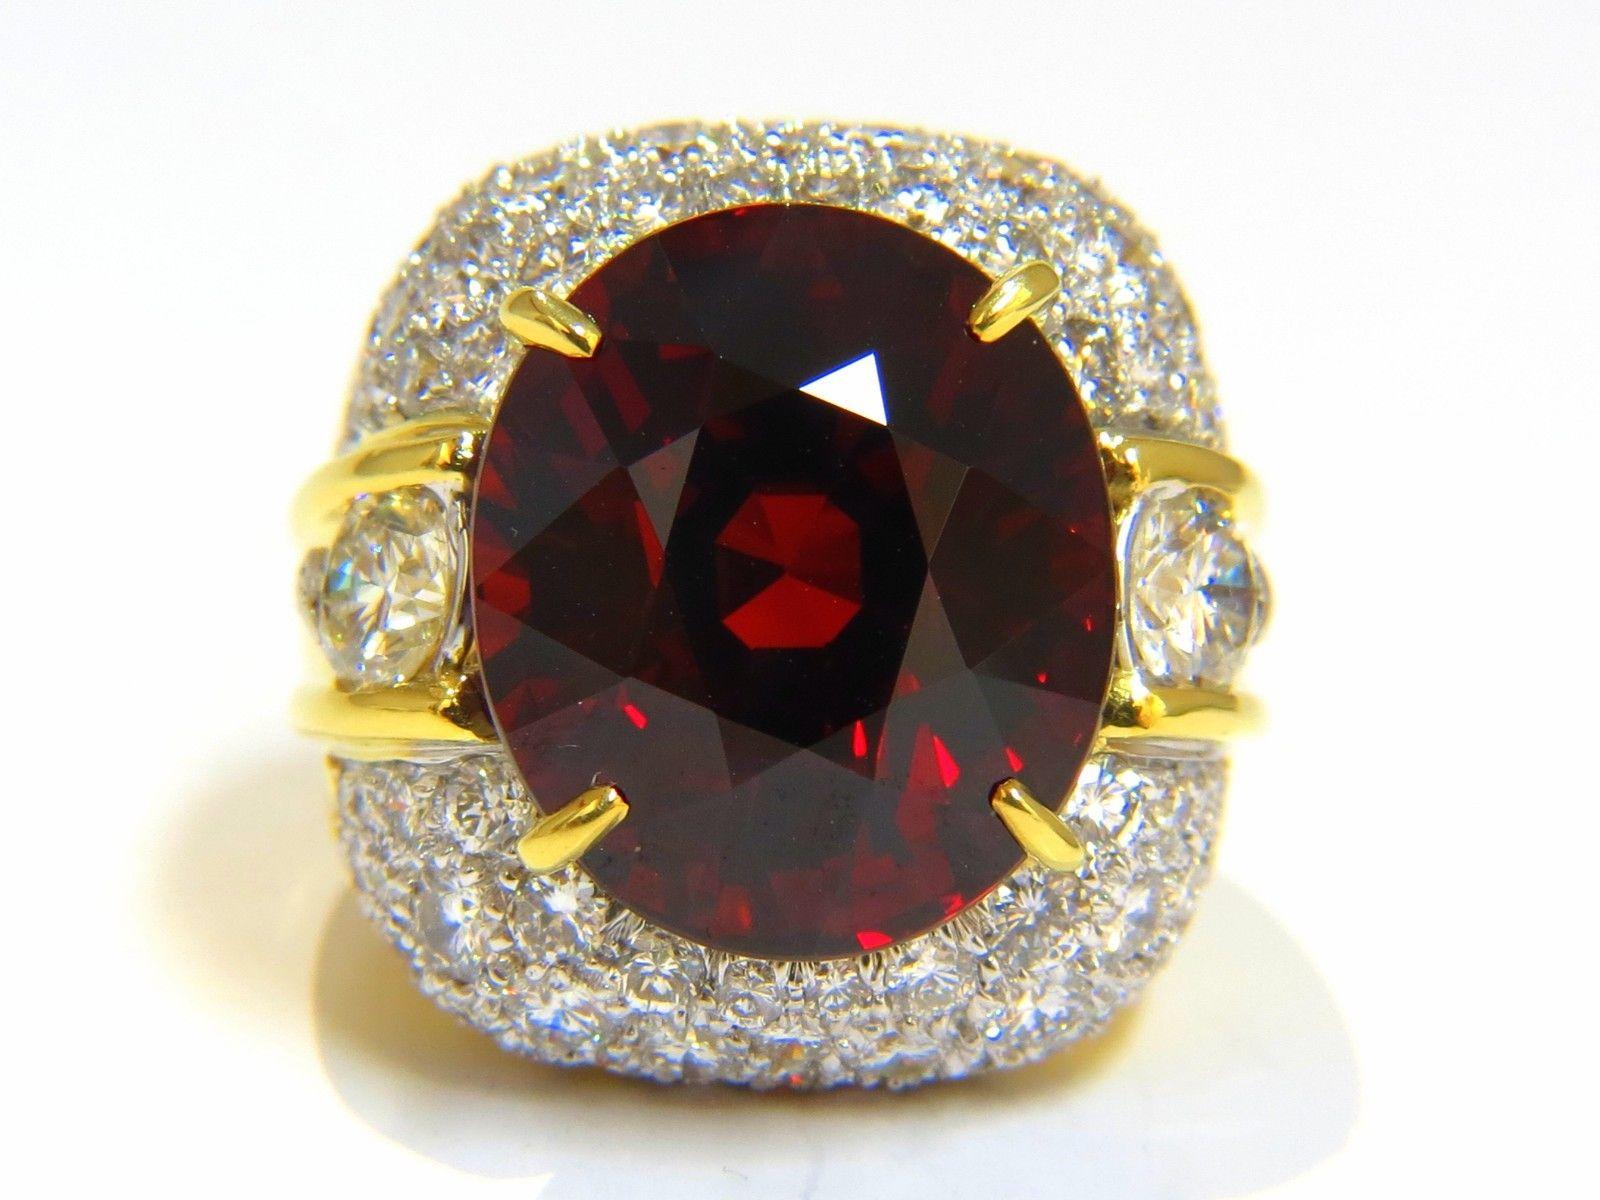 Raised Dome Spessartite 

GIA 28.64ct. Natural Red Spessartite & 4.00ct. diamonds ring.

GIA Certified Report ID: 2105439004

17.14 X 14.58 X 12.84mm

Full cut oval brilliant 

Clean Clarity & Transparent

4.00ct. Diamonds.

Rounds Full cuts